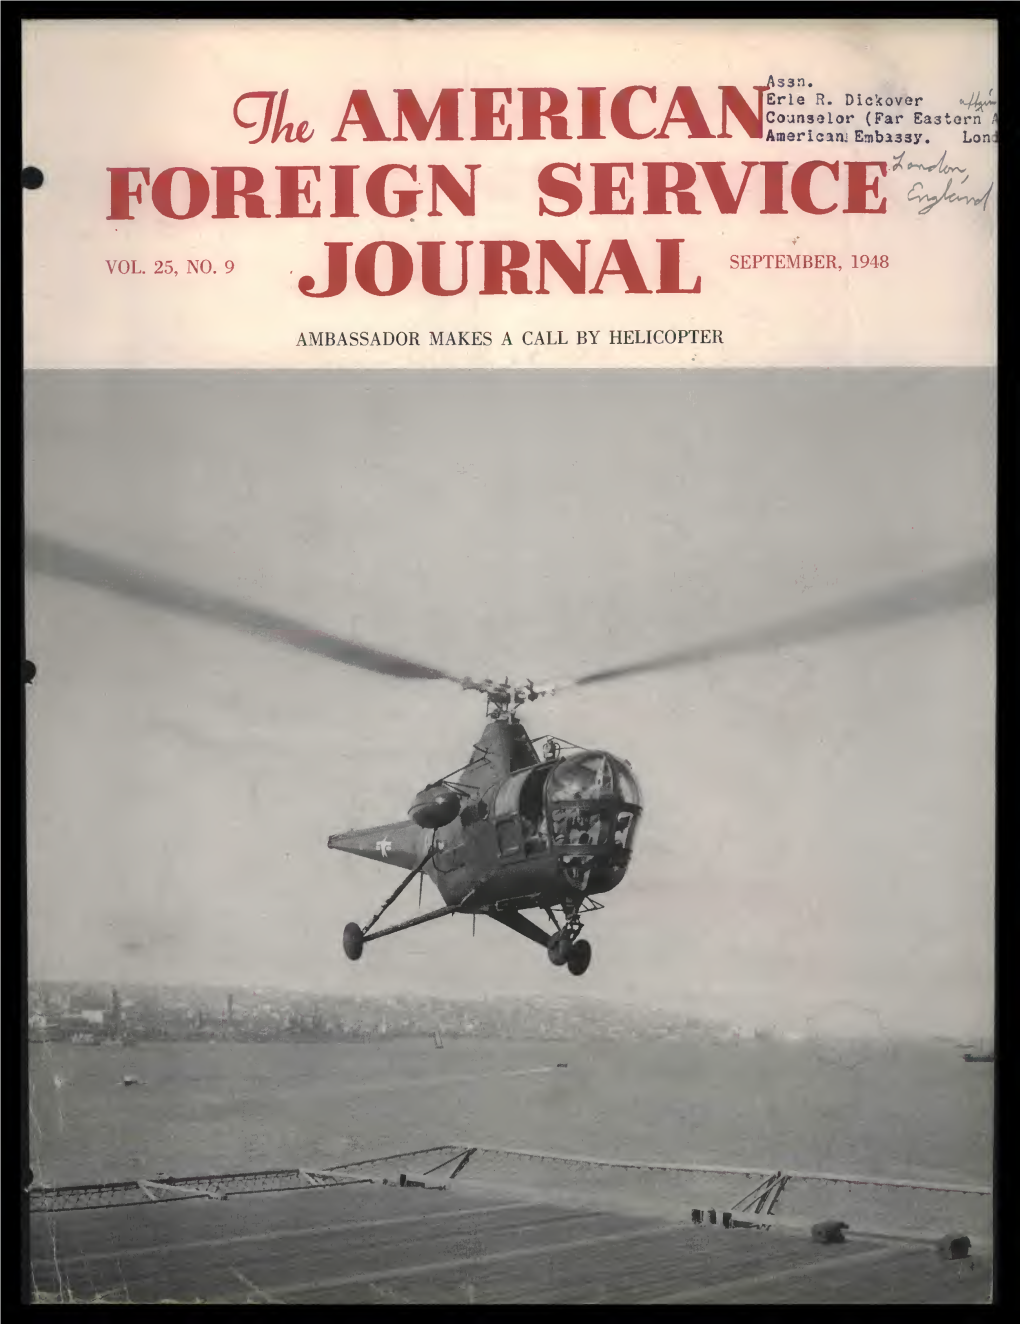 The Foreign Service Journal, September 1948